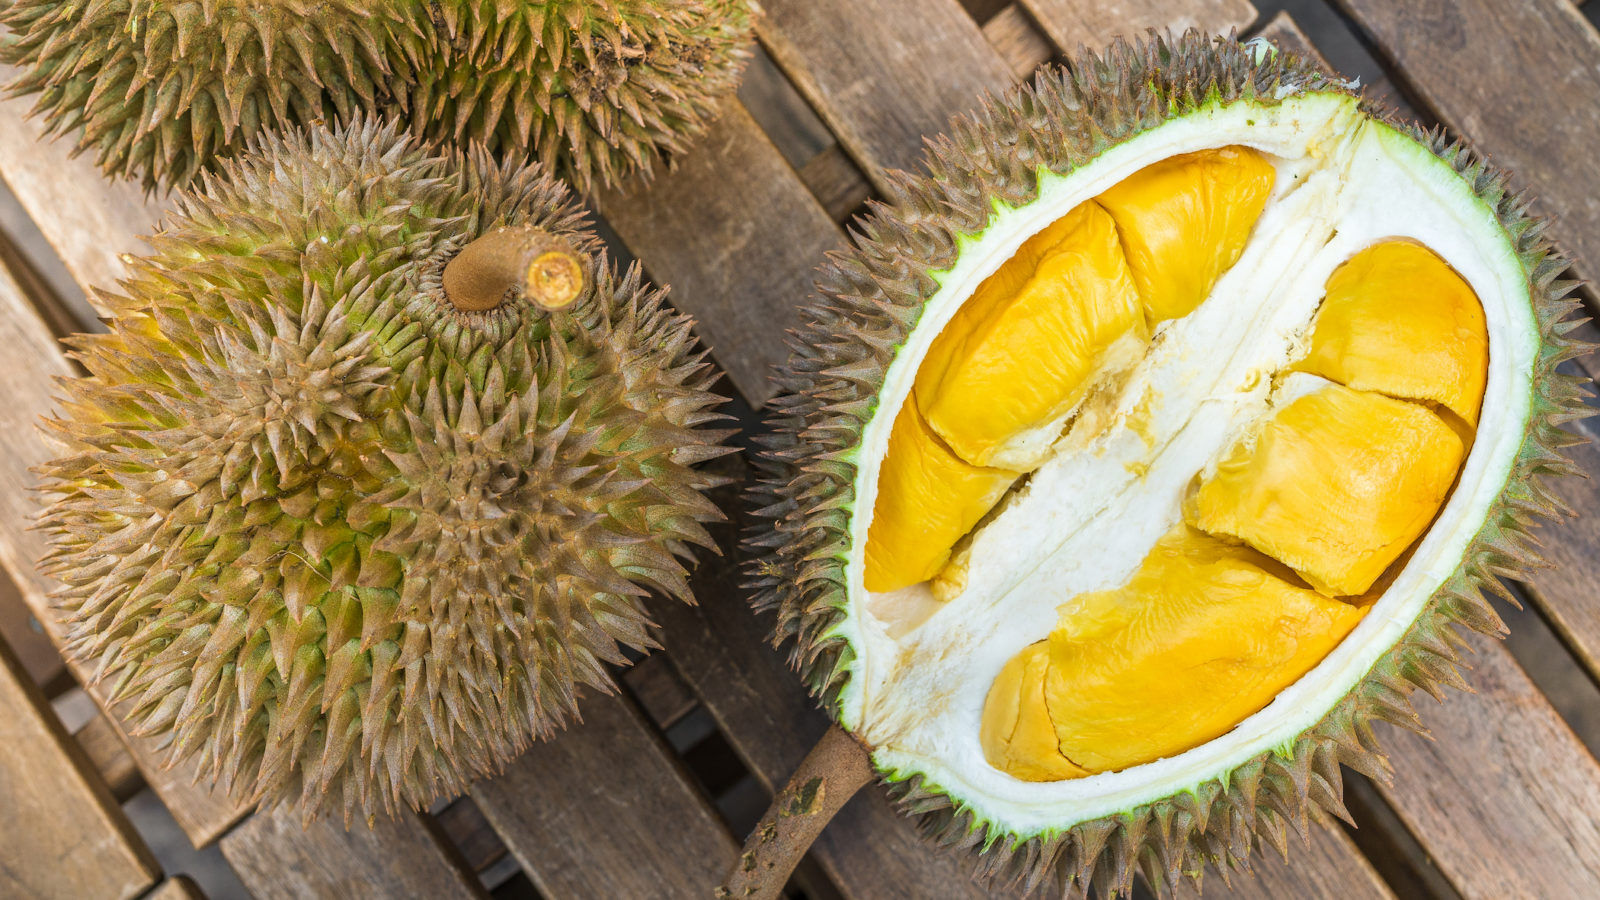 9 best durian delivery services in Singapore for your cravings this season